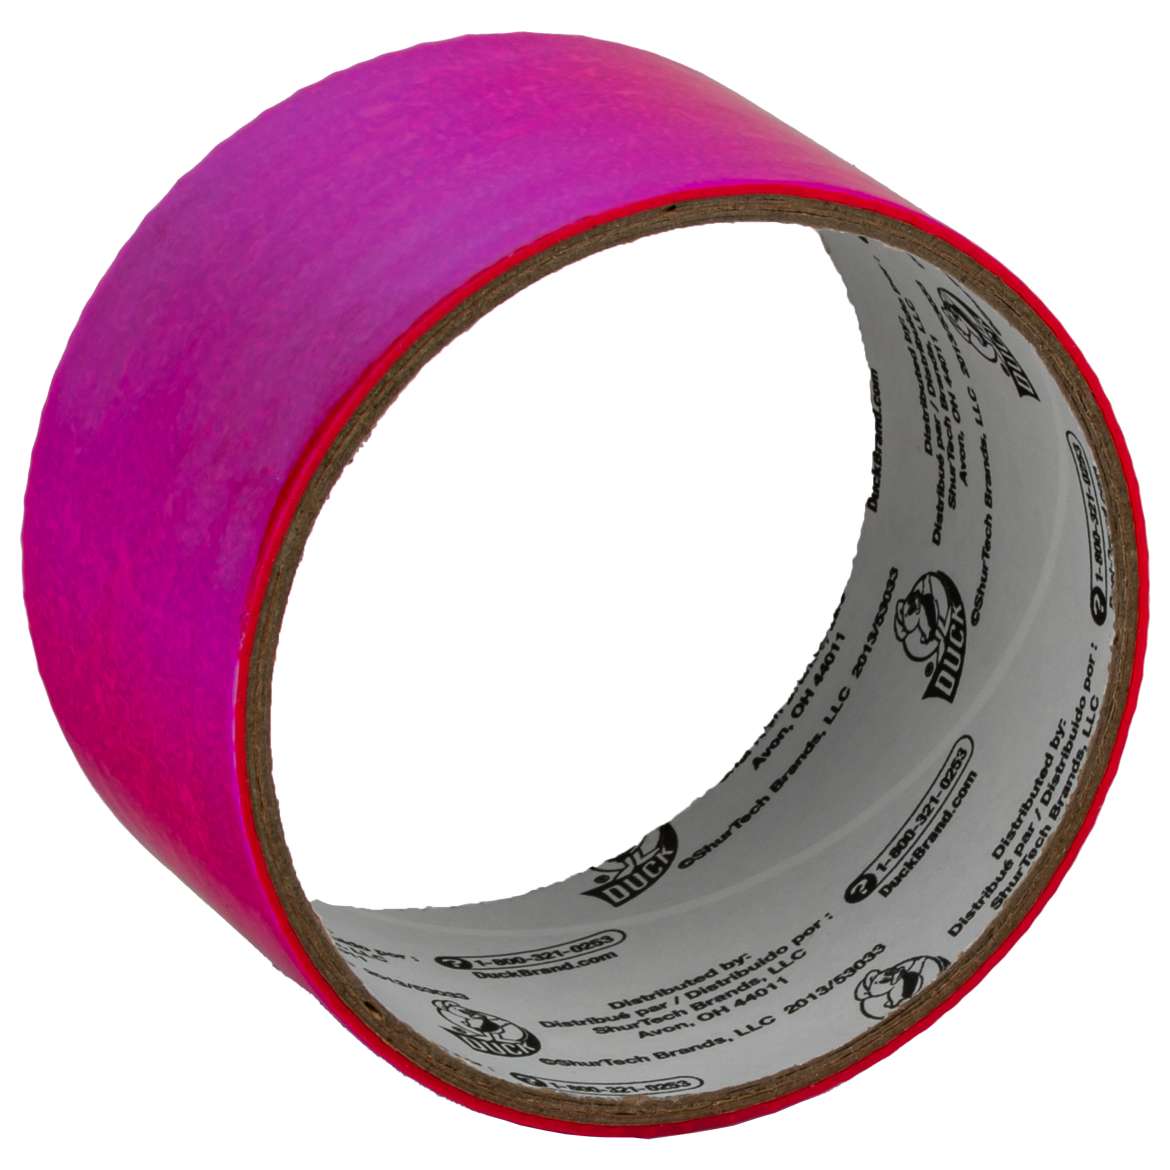 Duck Mirror® Crafting Tape